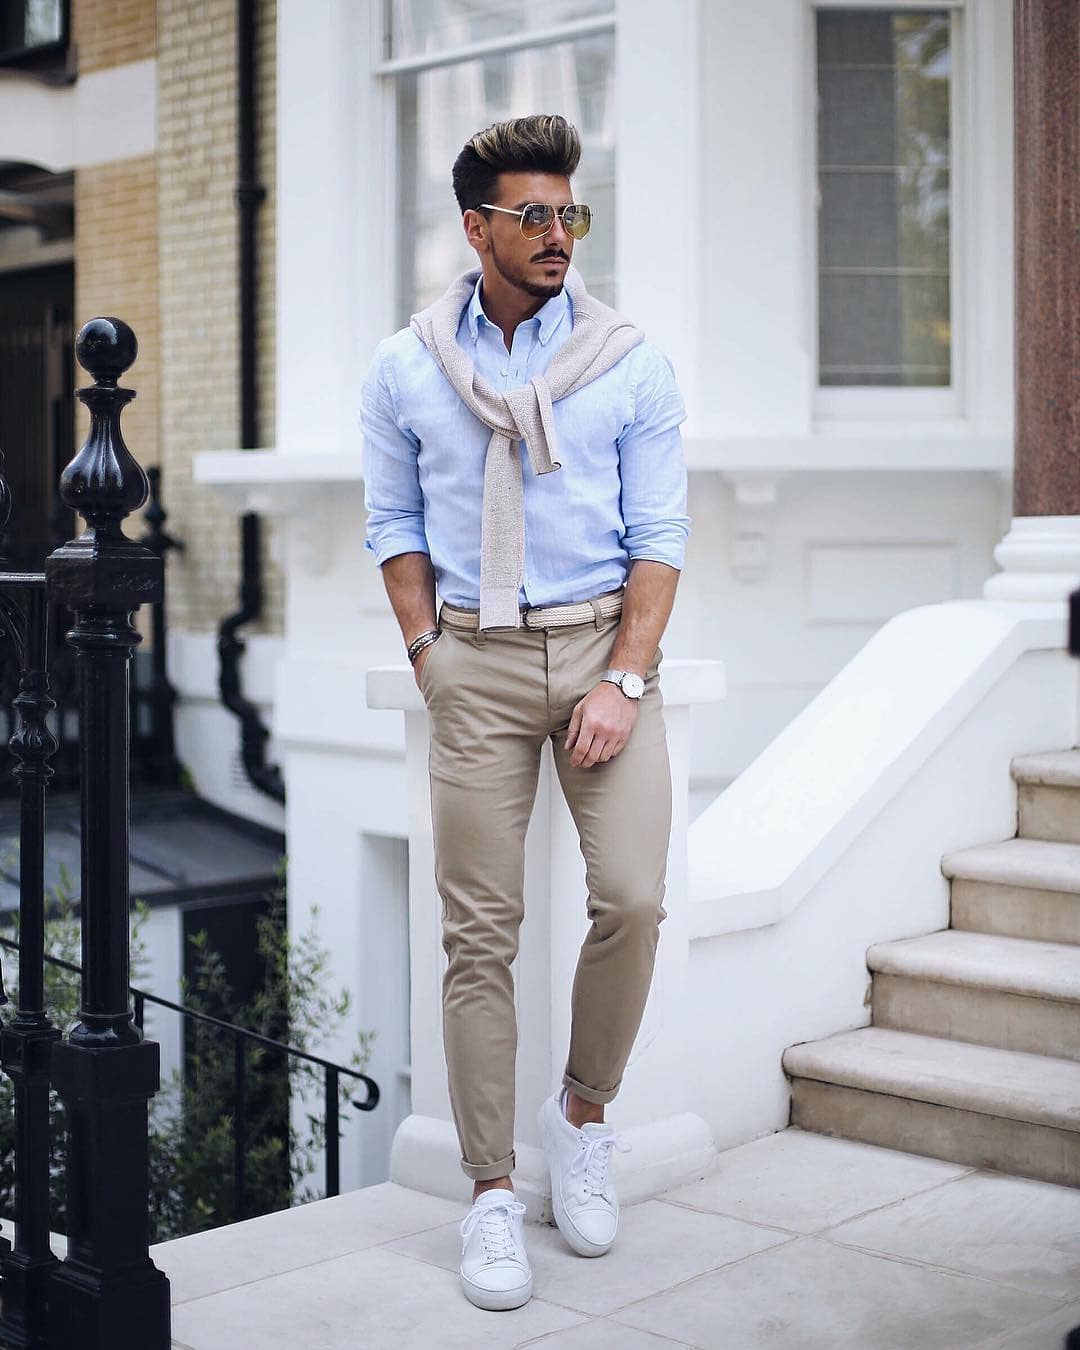 21 October Outfits For Men: Fashion Trends for October 2022